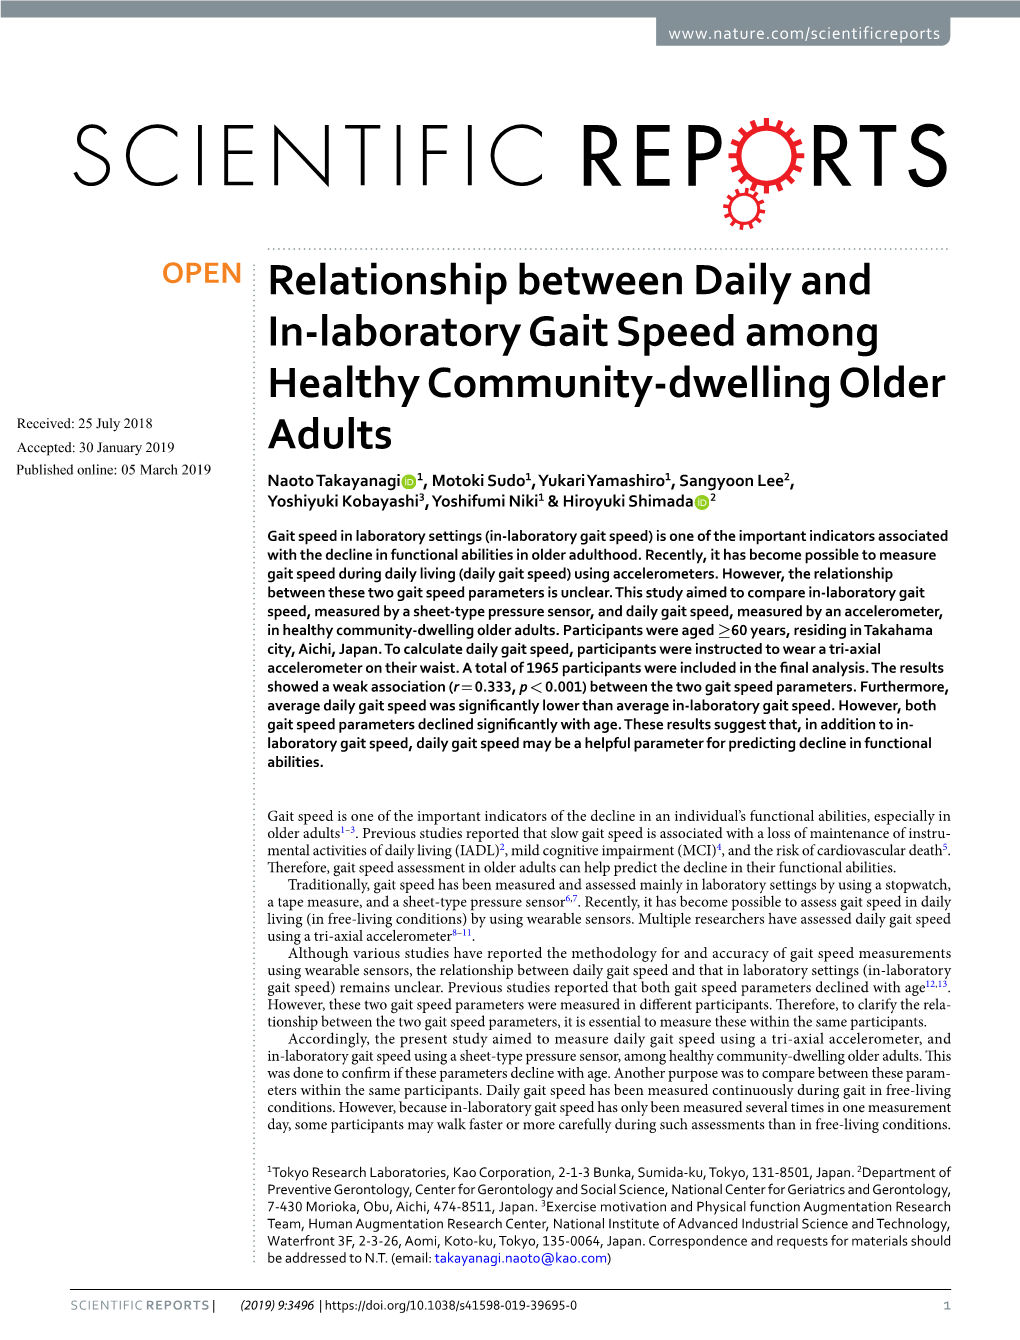 Relationship Between Daily and In-Laboratory Gait Speed Among